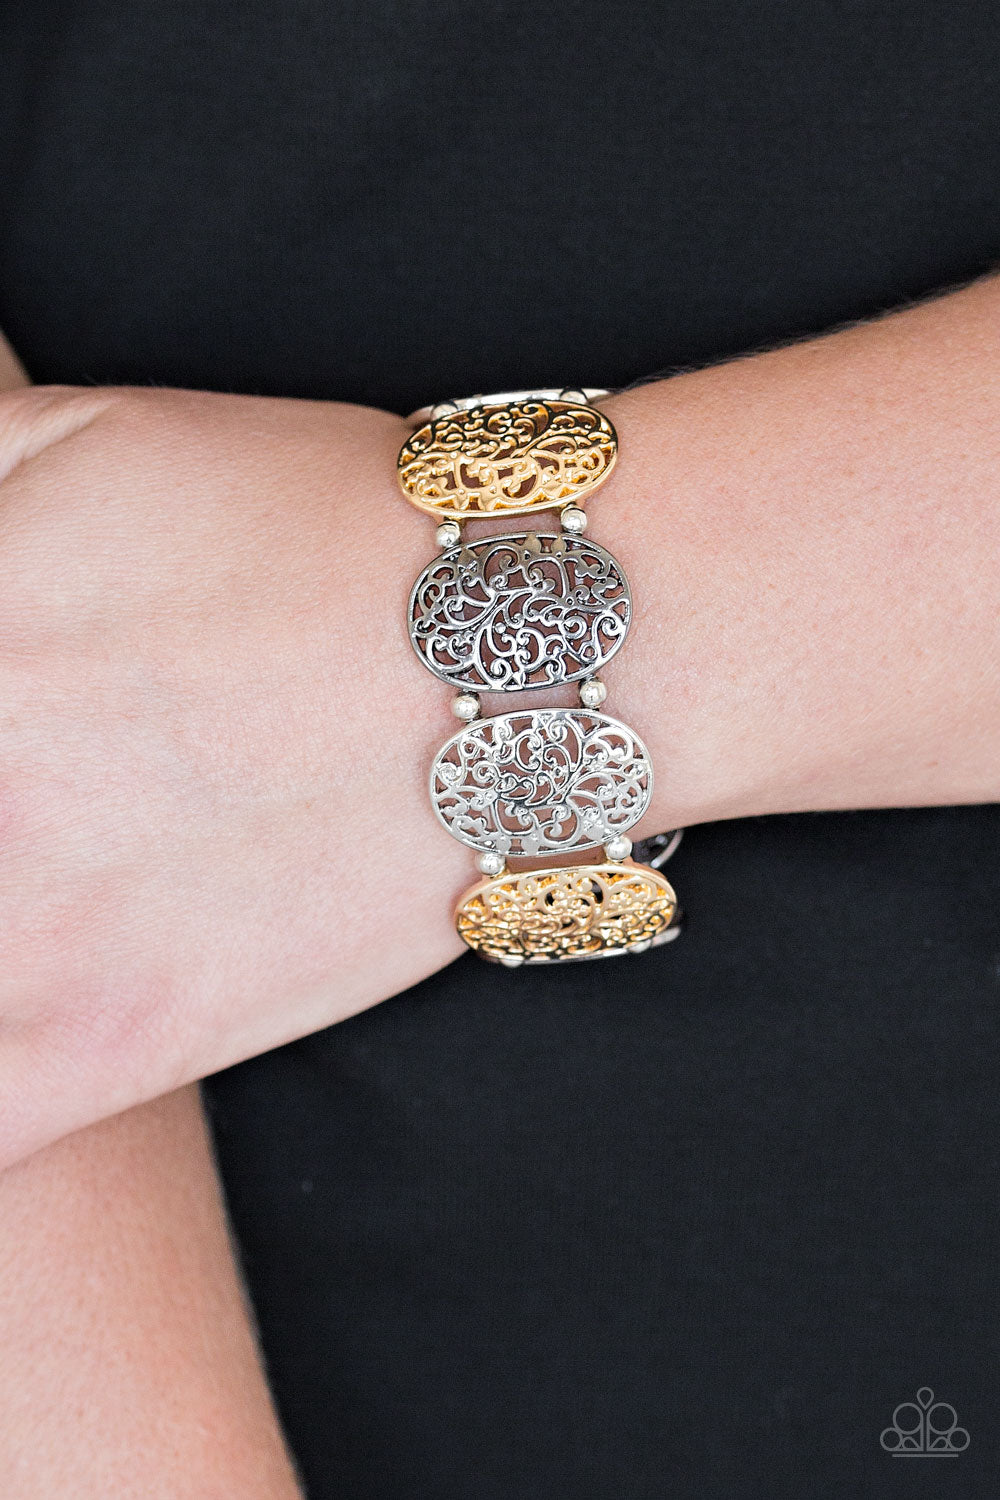 Everyday Elegance - Multi (Gold, Silver, and Gunmetal) Filigree Stretchy Bracelet - Paparazzi Accessories - All That Sparkles XOXO